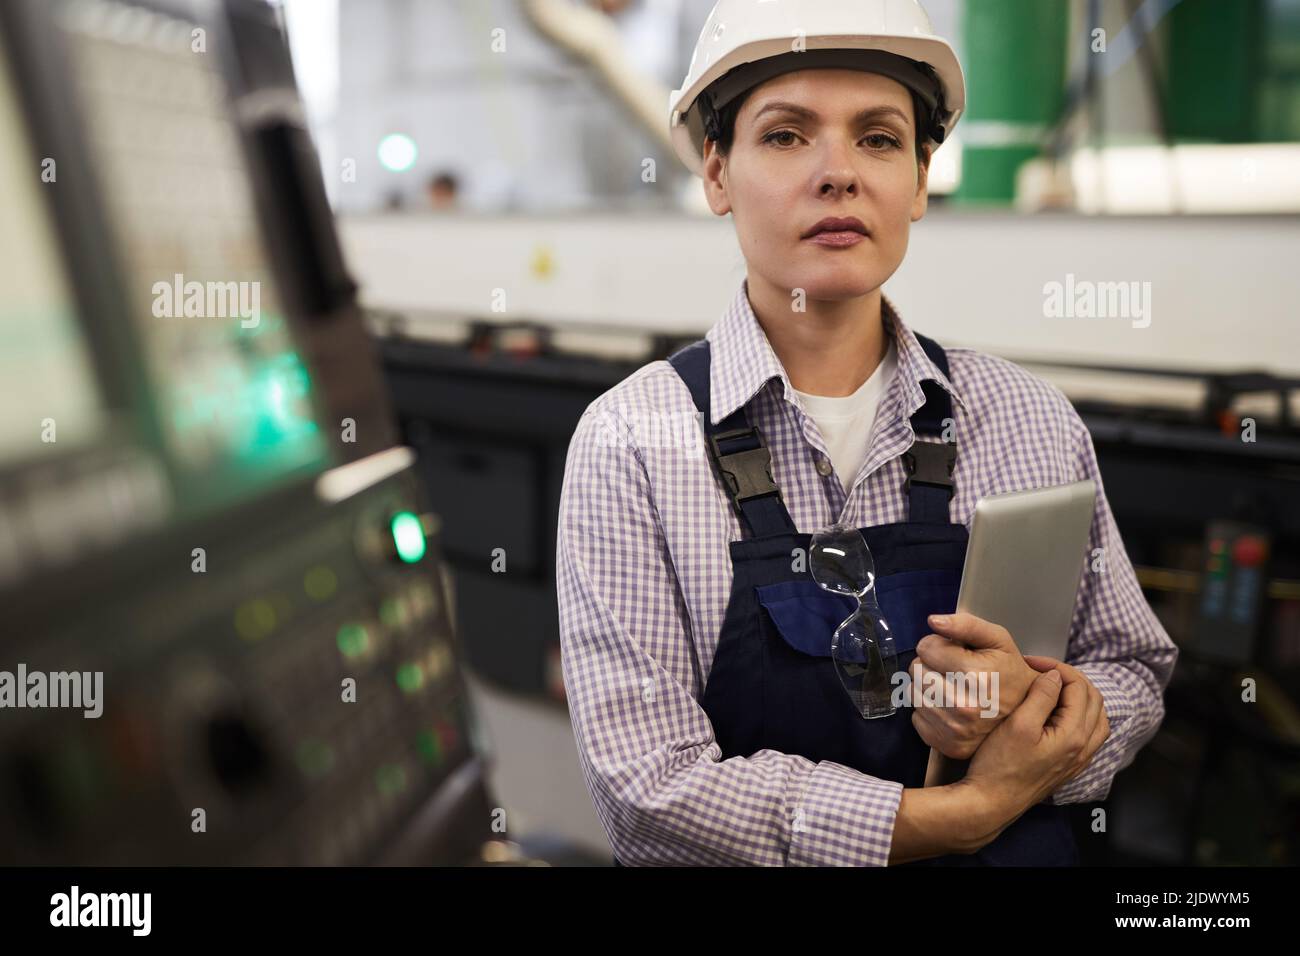 Portrait of serious confident female industrial engineer in hardhat and workwear standing at cnc lathe and holding tablet Stock Photo